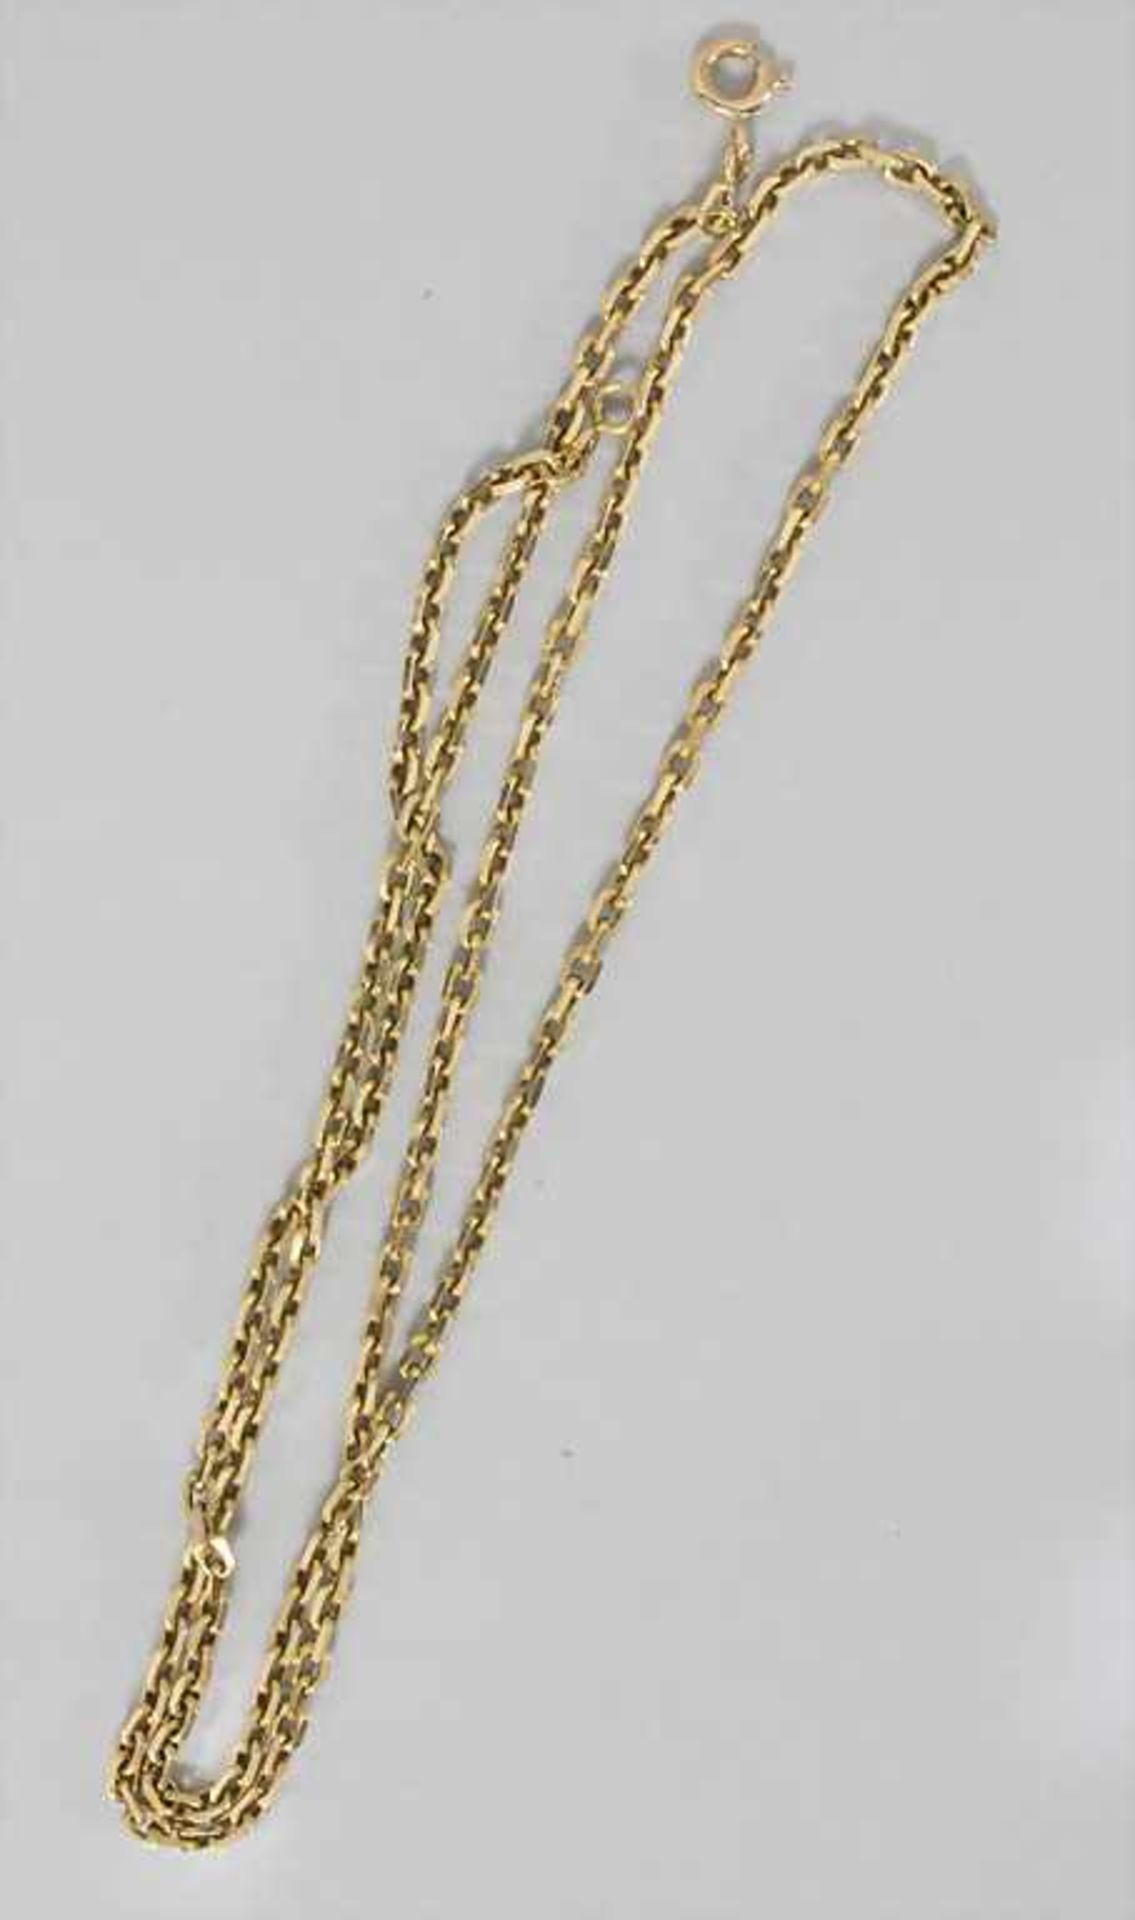 Goldkette / A gold necklace - Image 2 of 2